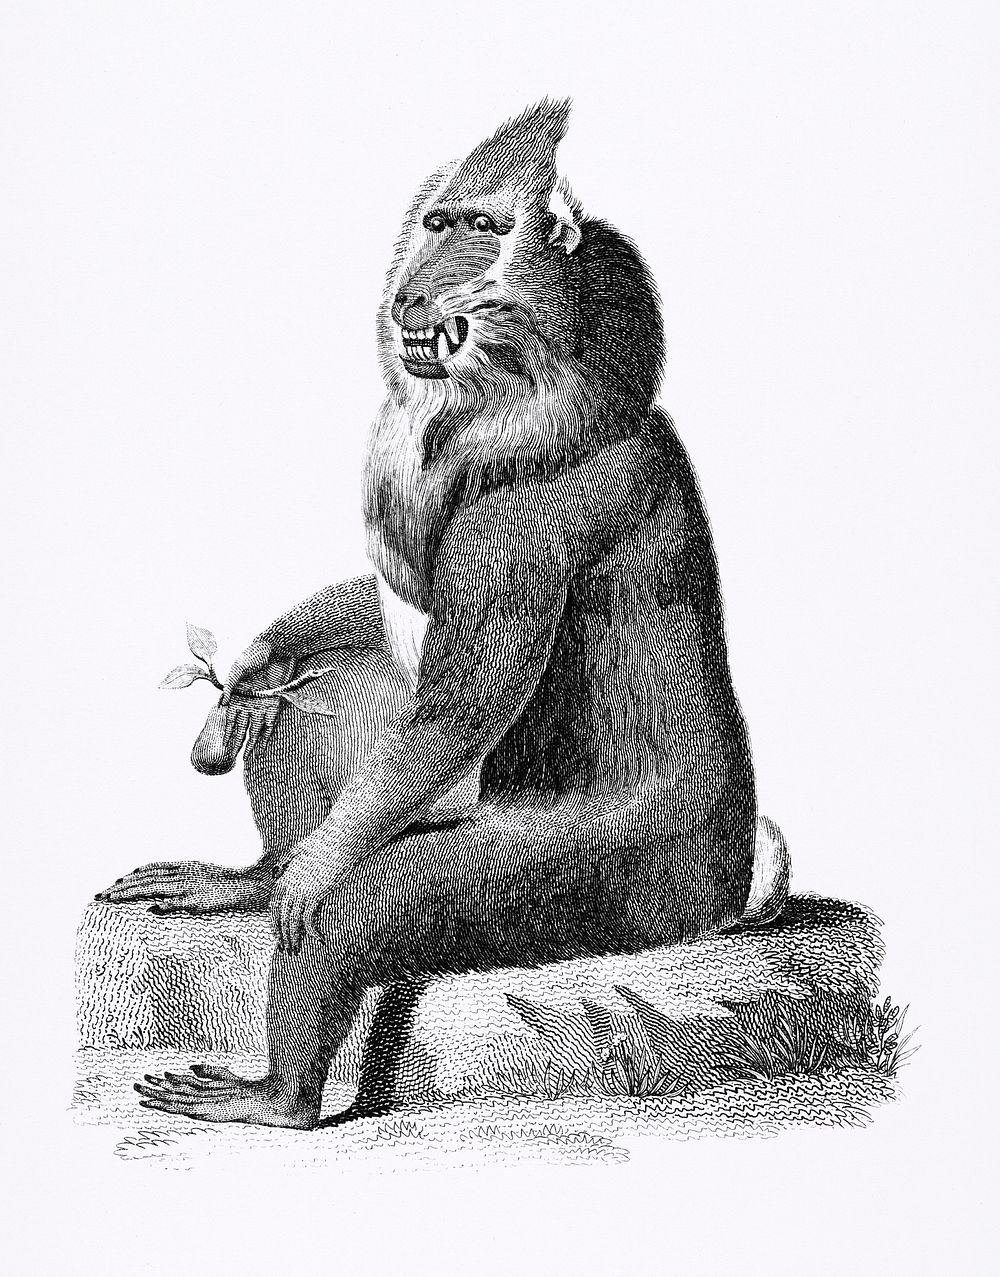 Variegated baboon from Zoological lectures delivered at the Royal institution in the years 1806-7 illustrated by George Shaw…